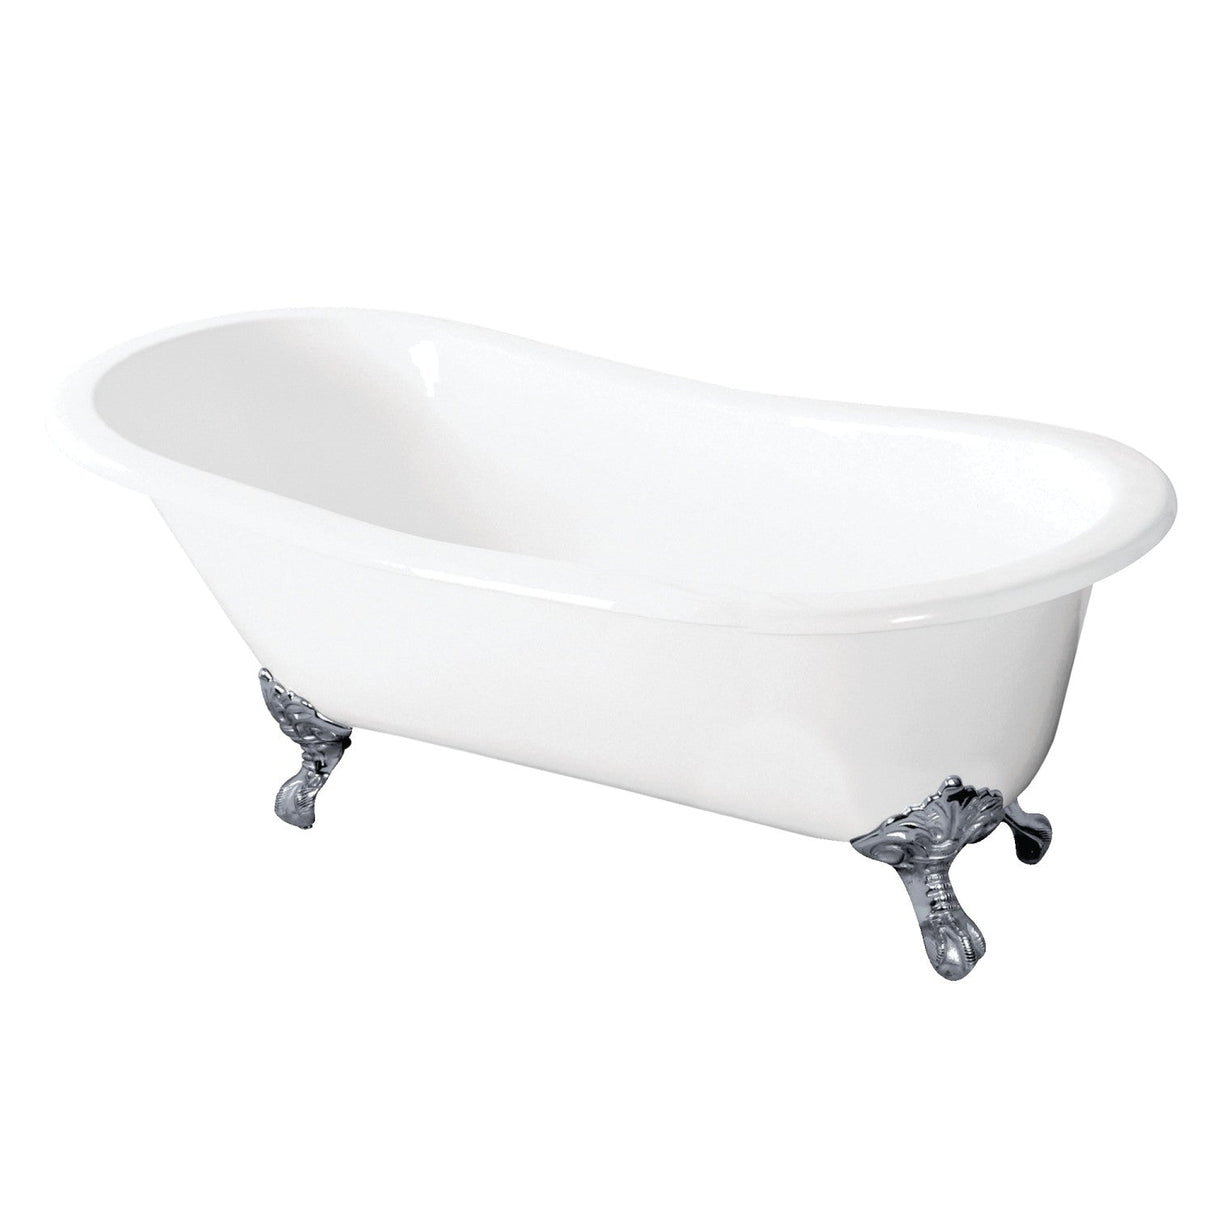 Tazatina VCTND5731B1 57-Inch Cast Iron Single Slipper Clawfoot Tub (No Faucet Drillings), White/Polished Chrome